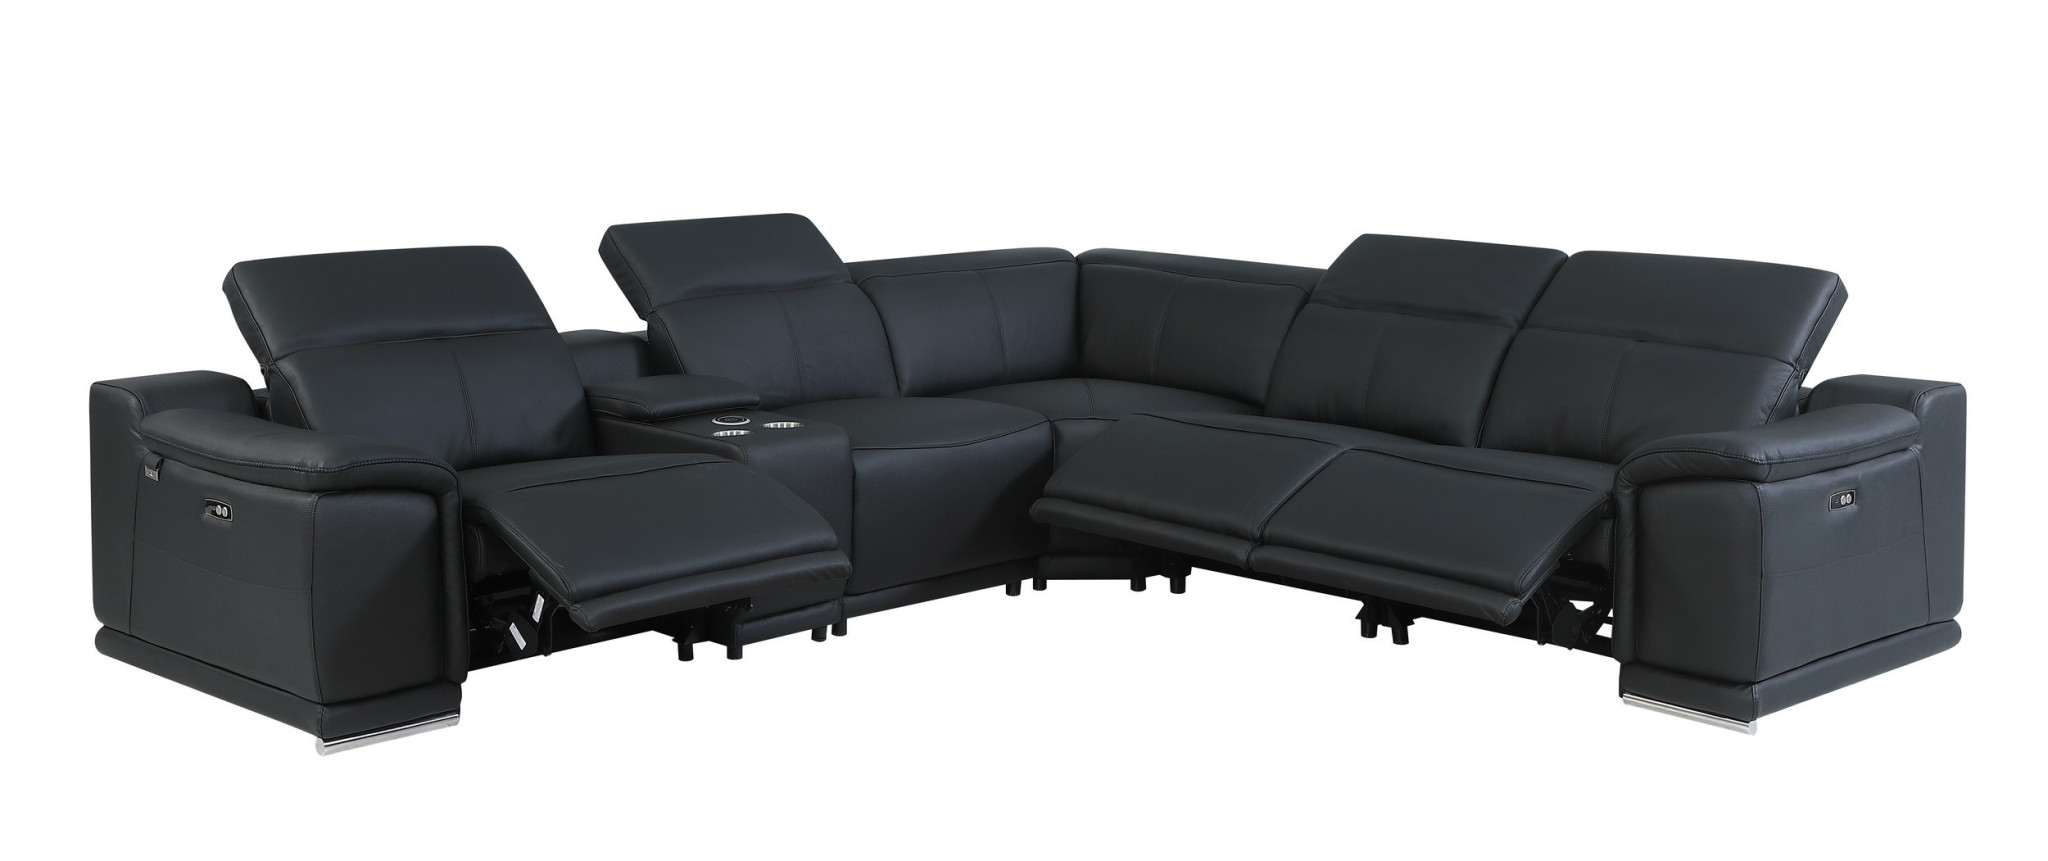 Beige Italian Leather Power Reclining U Shaped Six Piece Corner Sectional With Console-476588-1